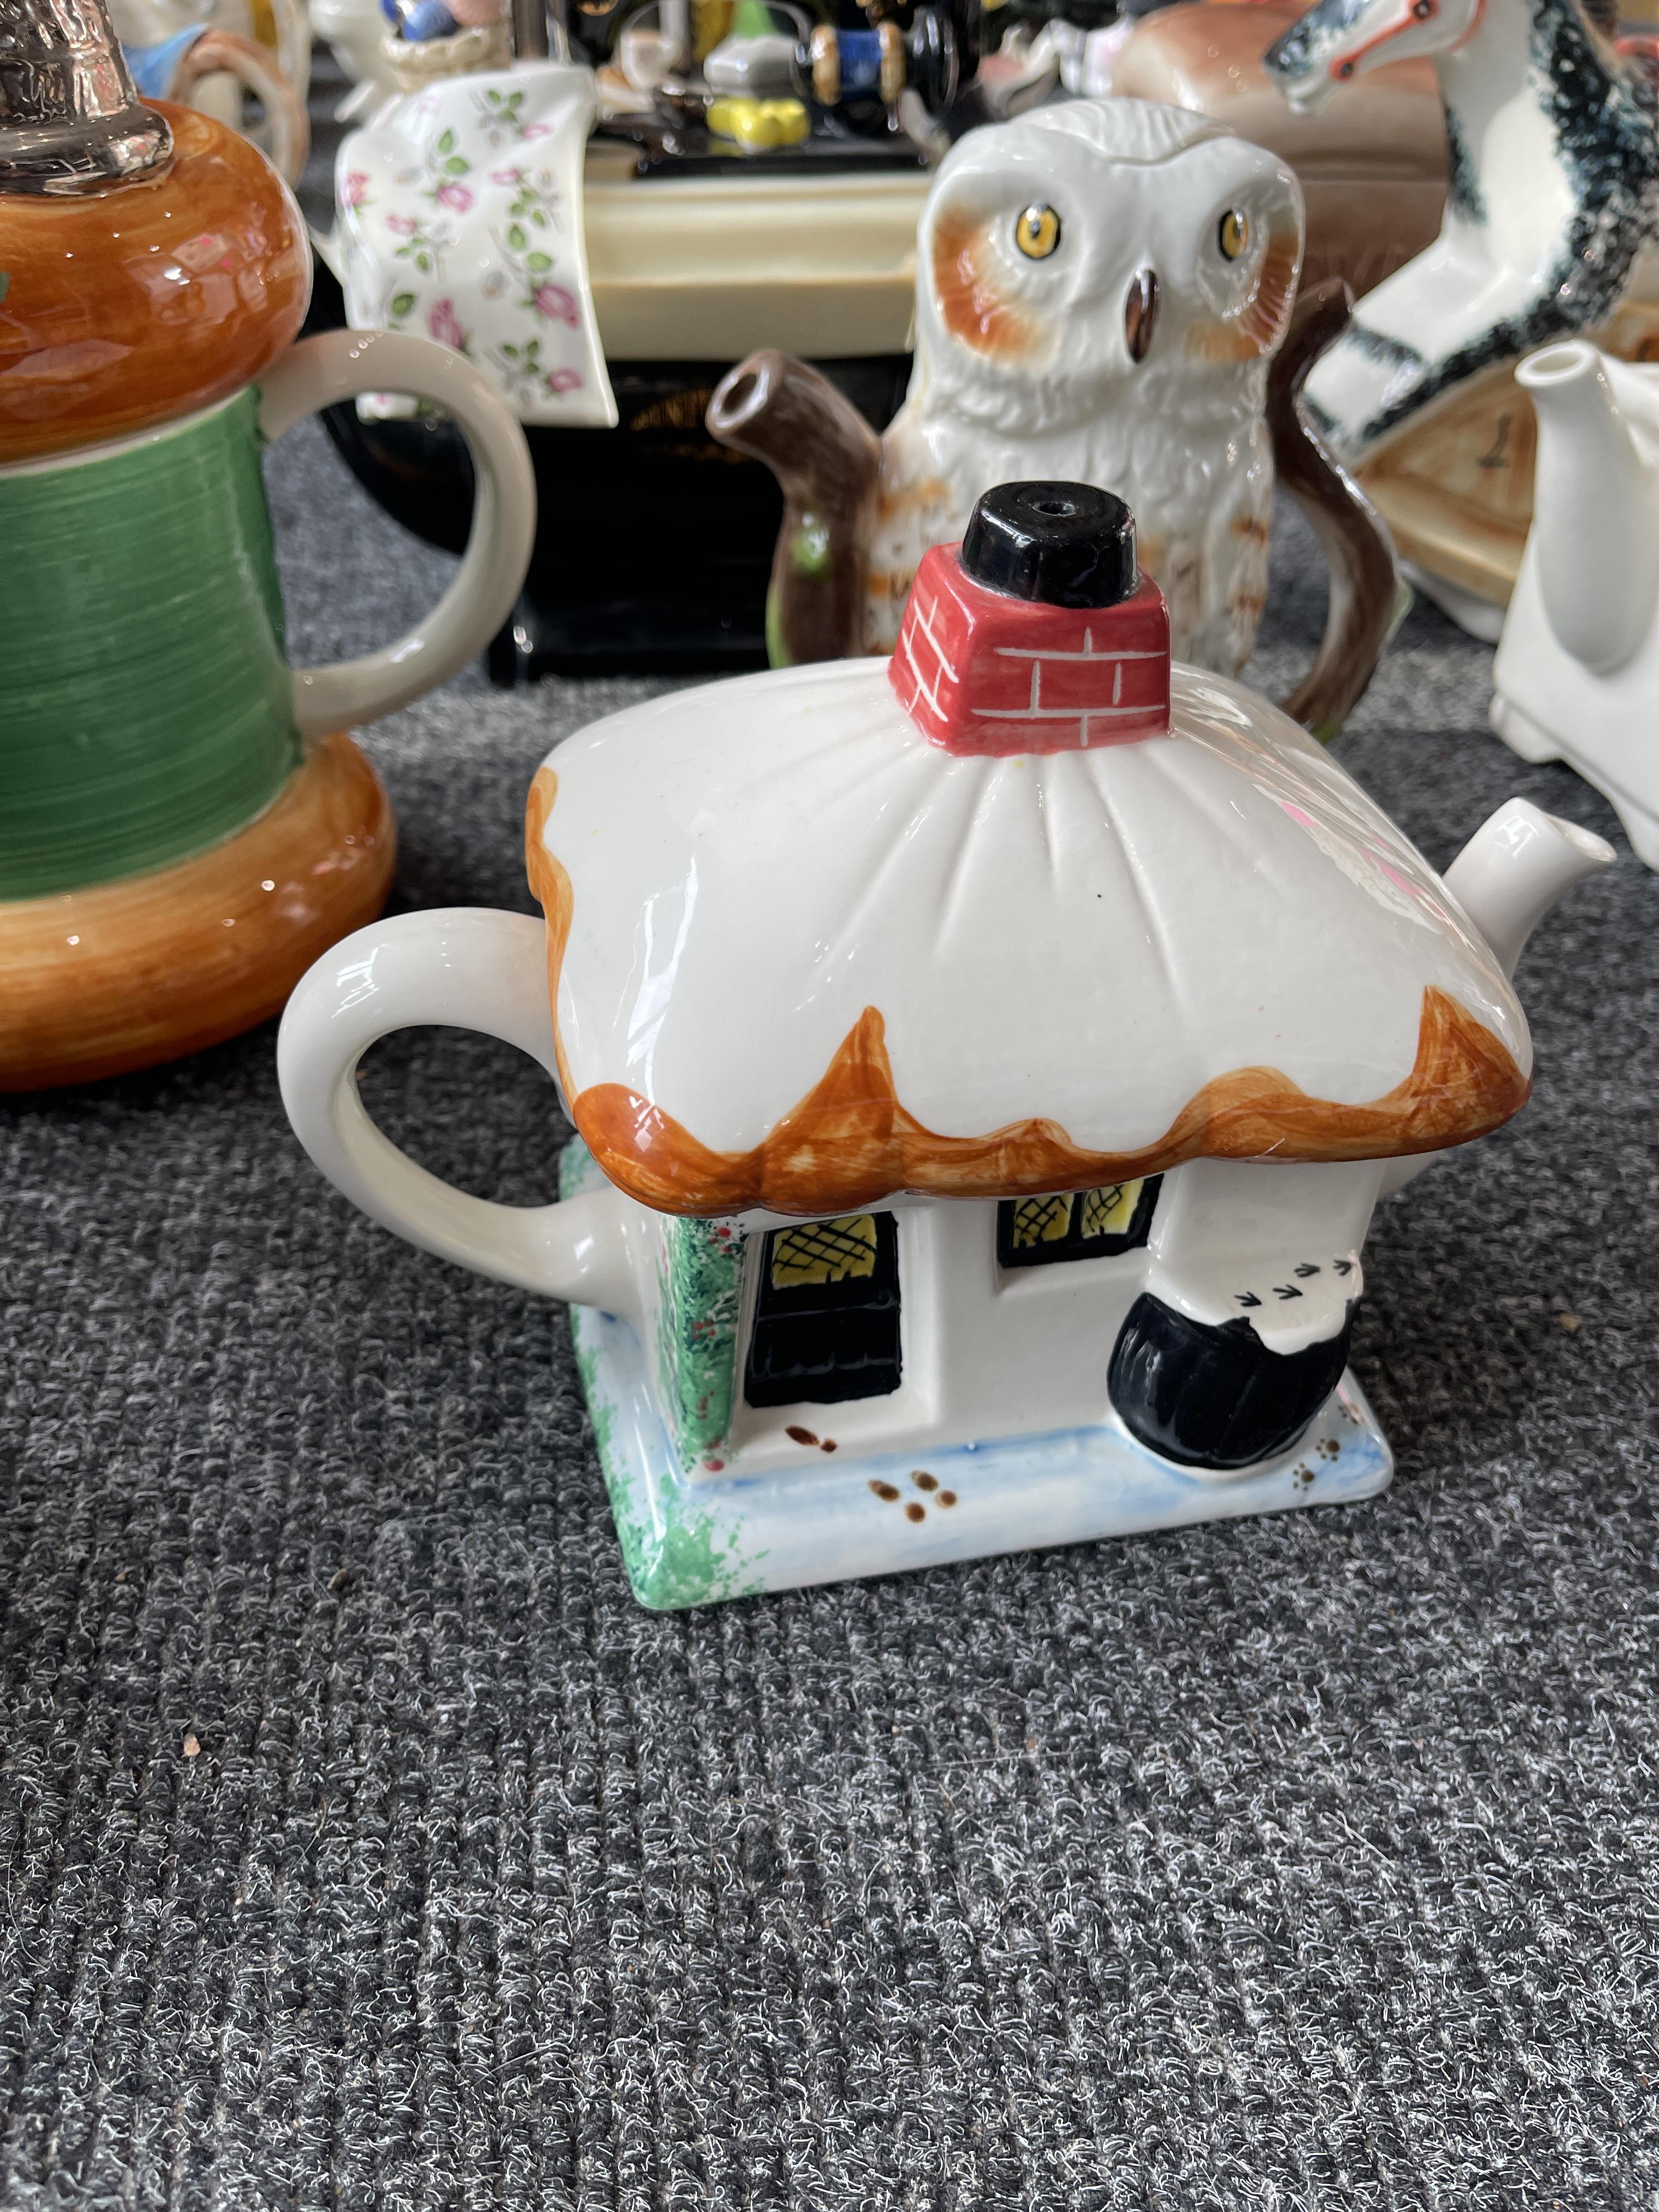 Collection of Ceramic Tea Pots - Image 39 of 44